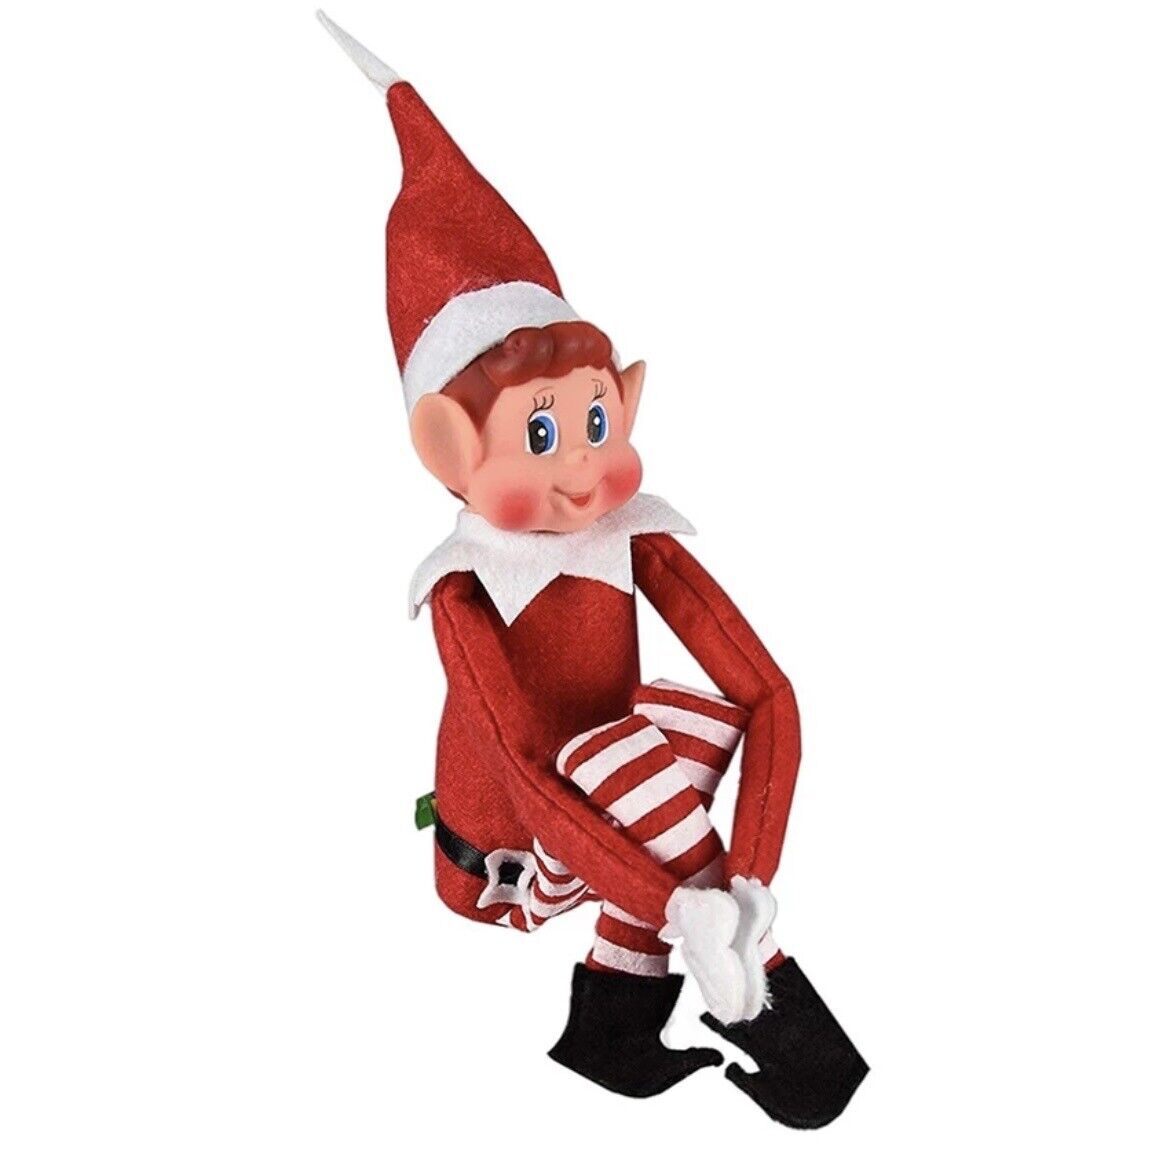 The Elf On A Christmas Tradition ELF Blue Eyes Doll BRAND NEW Red White Elf